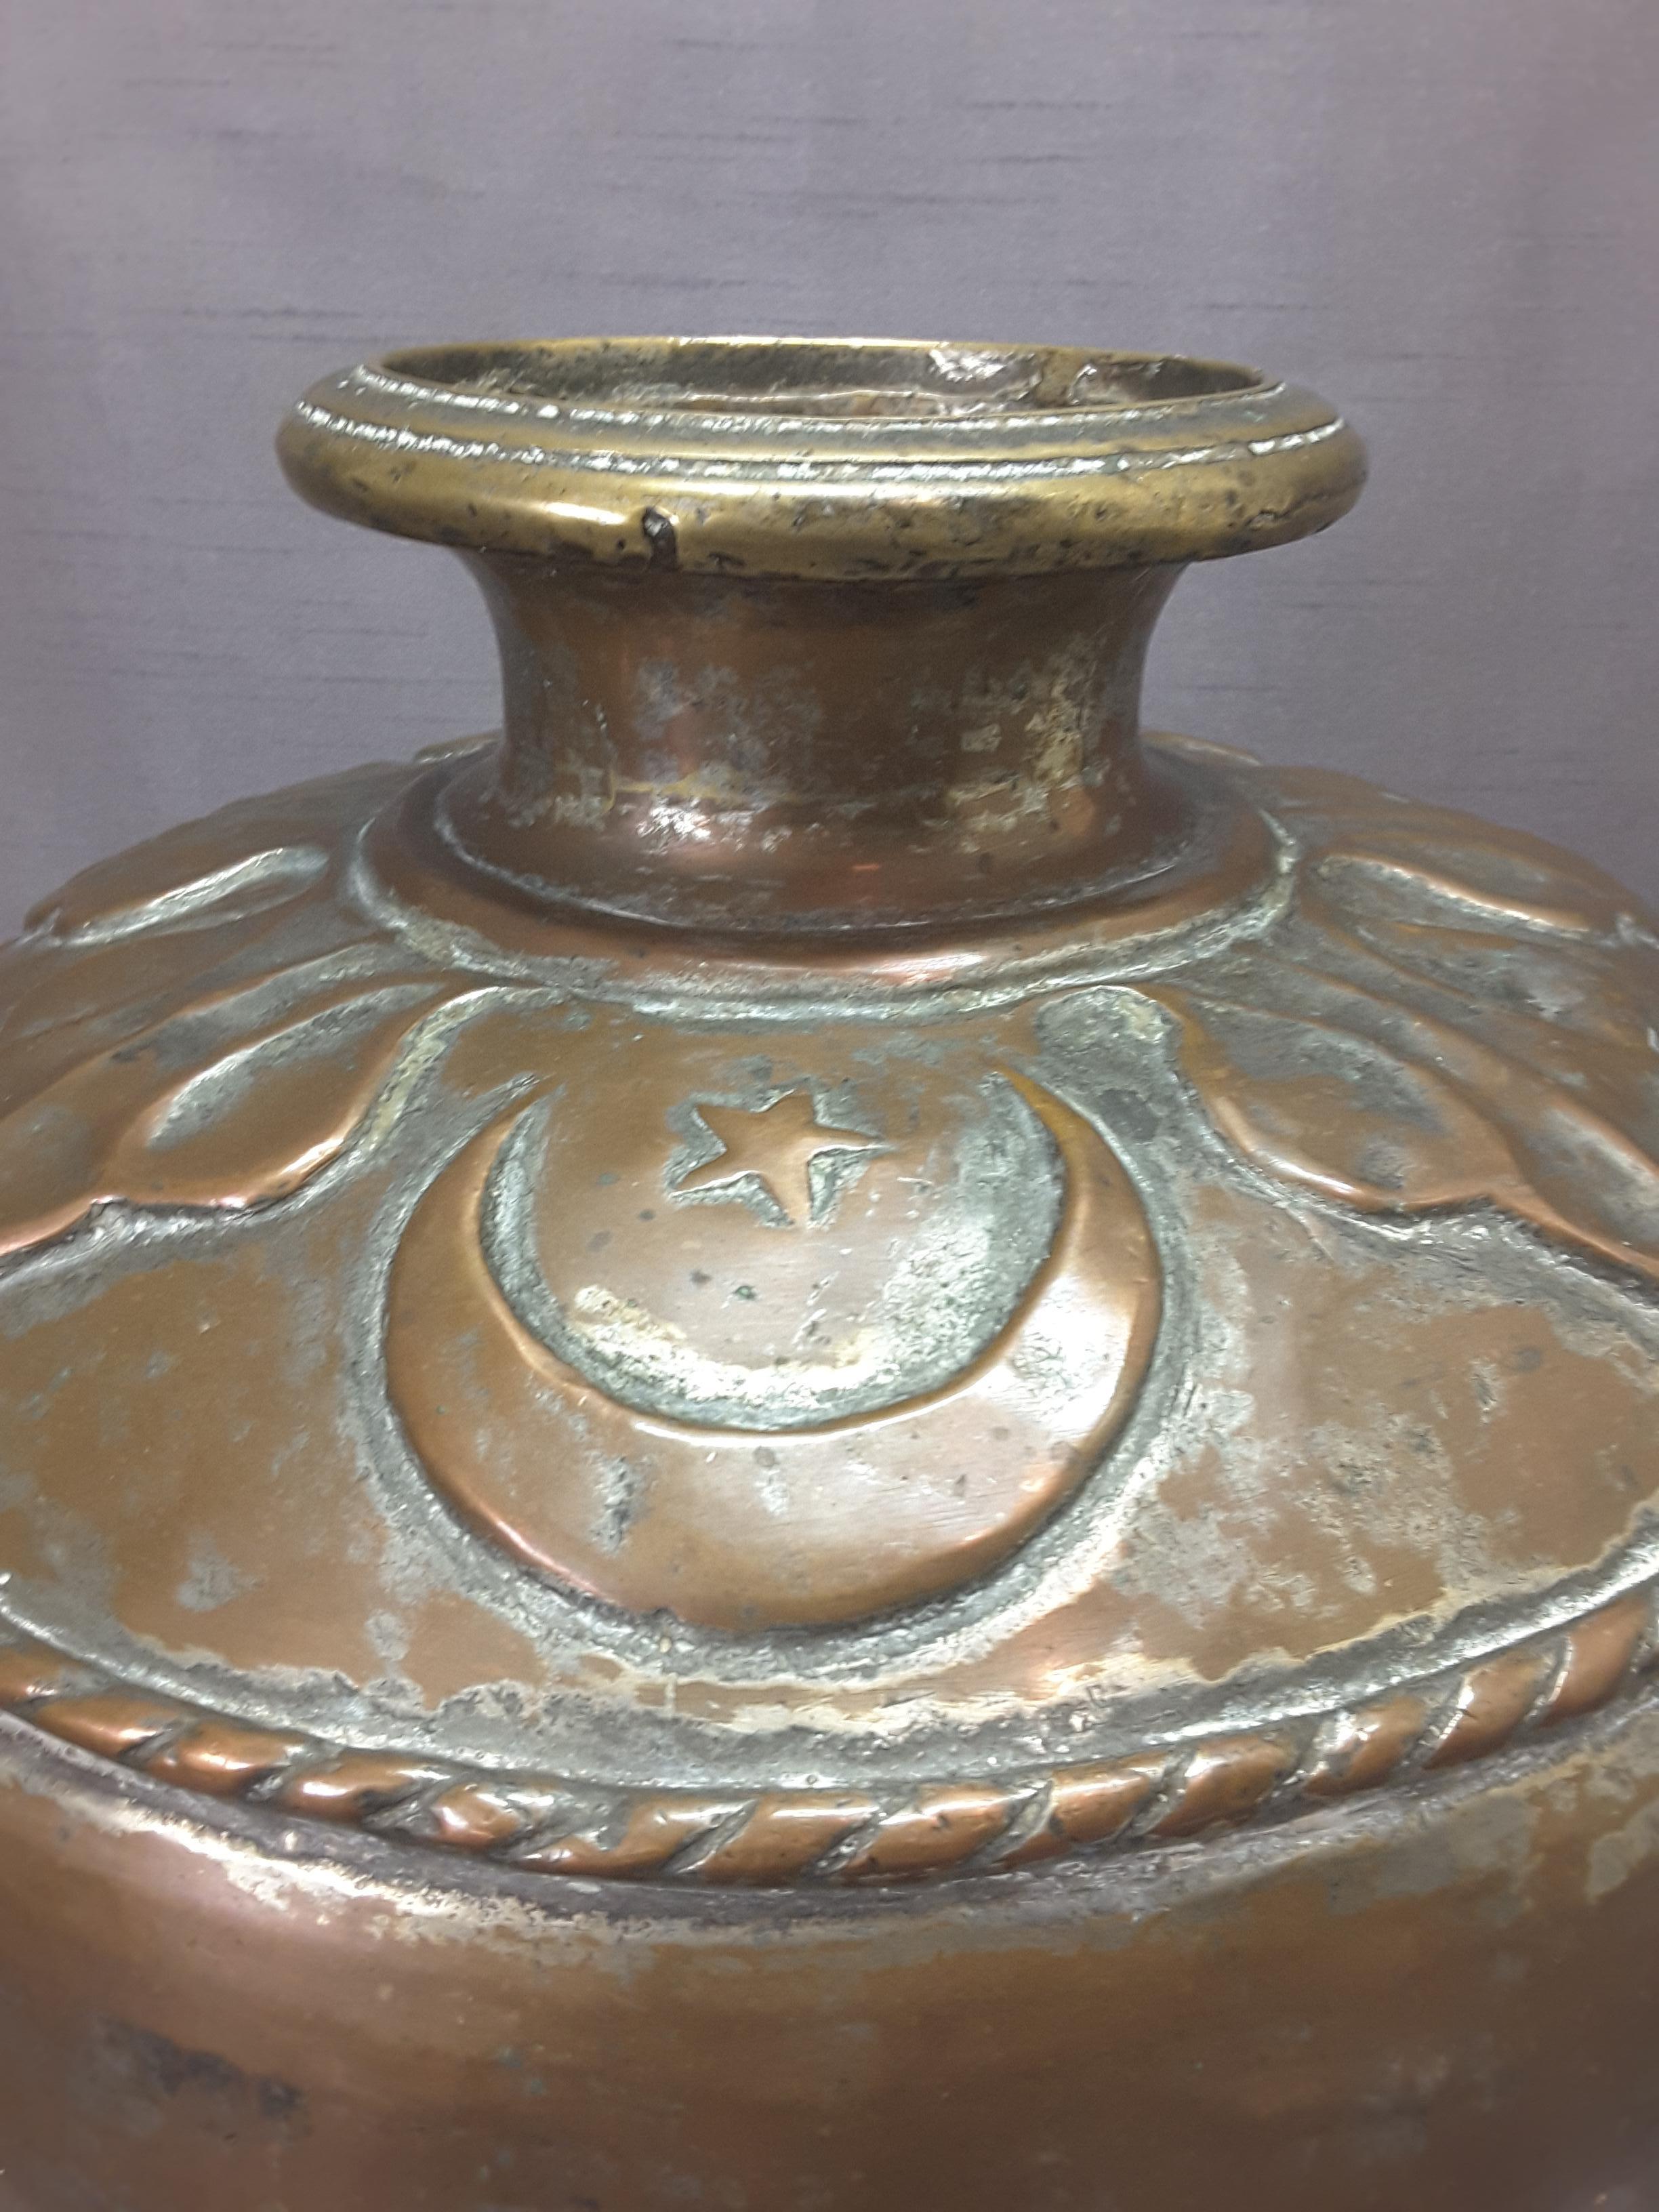 Large Middle Eastern Tinned Copper Water Vessel, 19th Century, Decorated with rope twist rim, Turkish Sicle and Star, Bordered with a stylized leaf pattern rim. Dove tailed copper jointed construction, extremely well made and usable. Probably dates